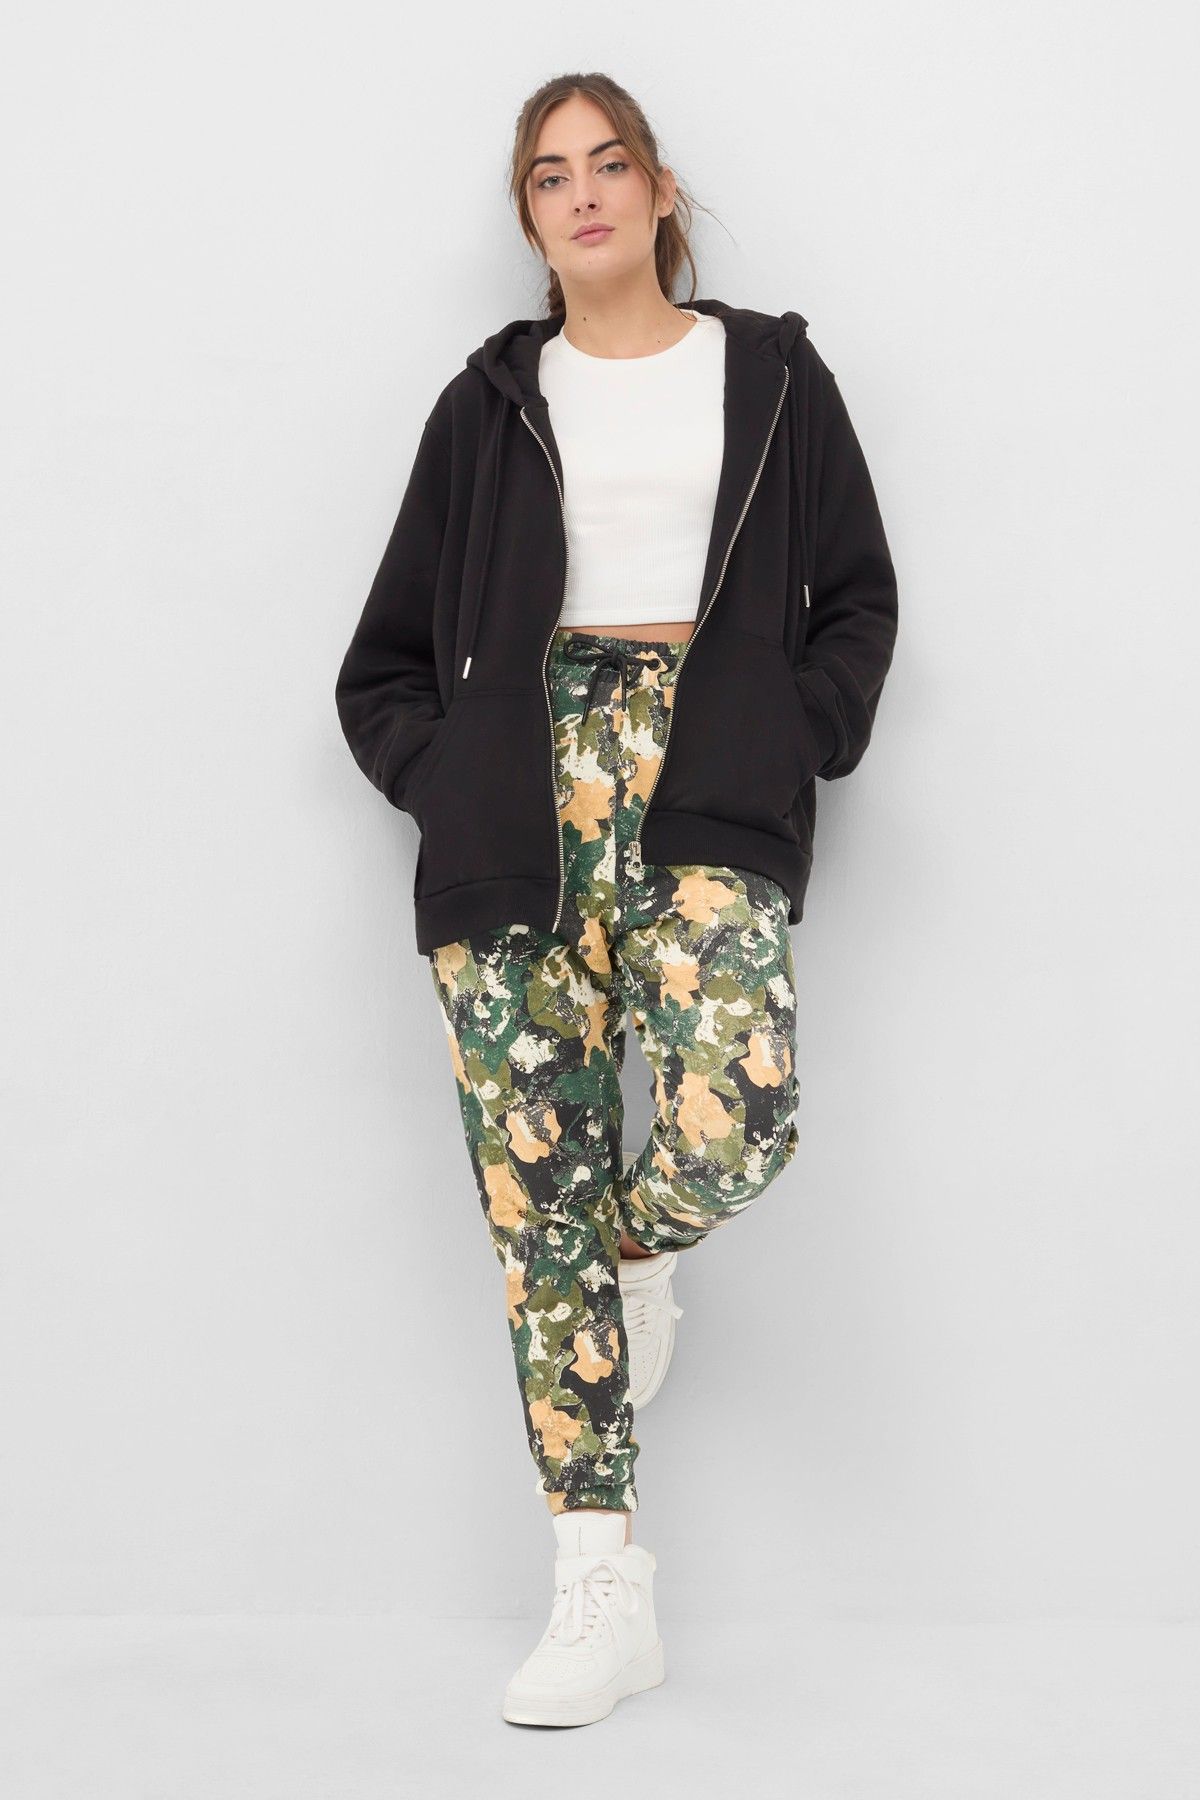 PRETTYLITTLETHING Camouflage Trousers Sale and Outlet  Women  1800  discounted products  FASHIOLAcouk